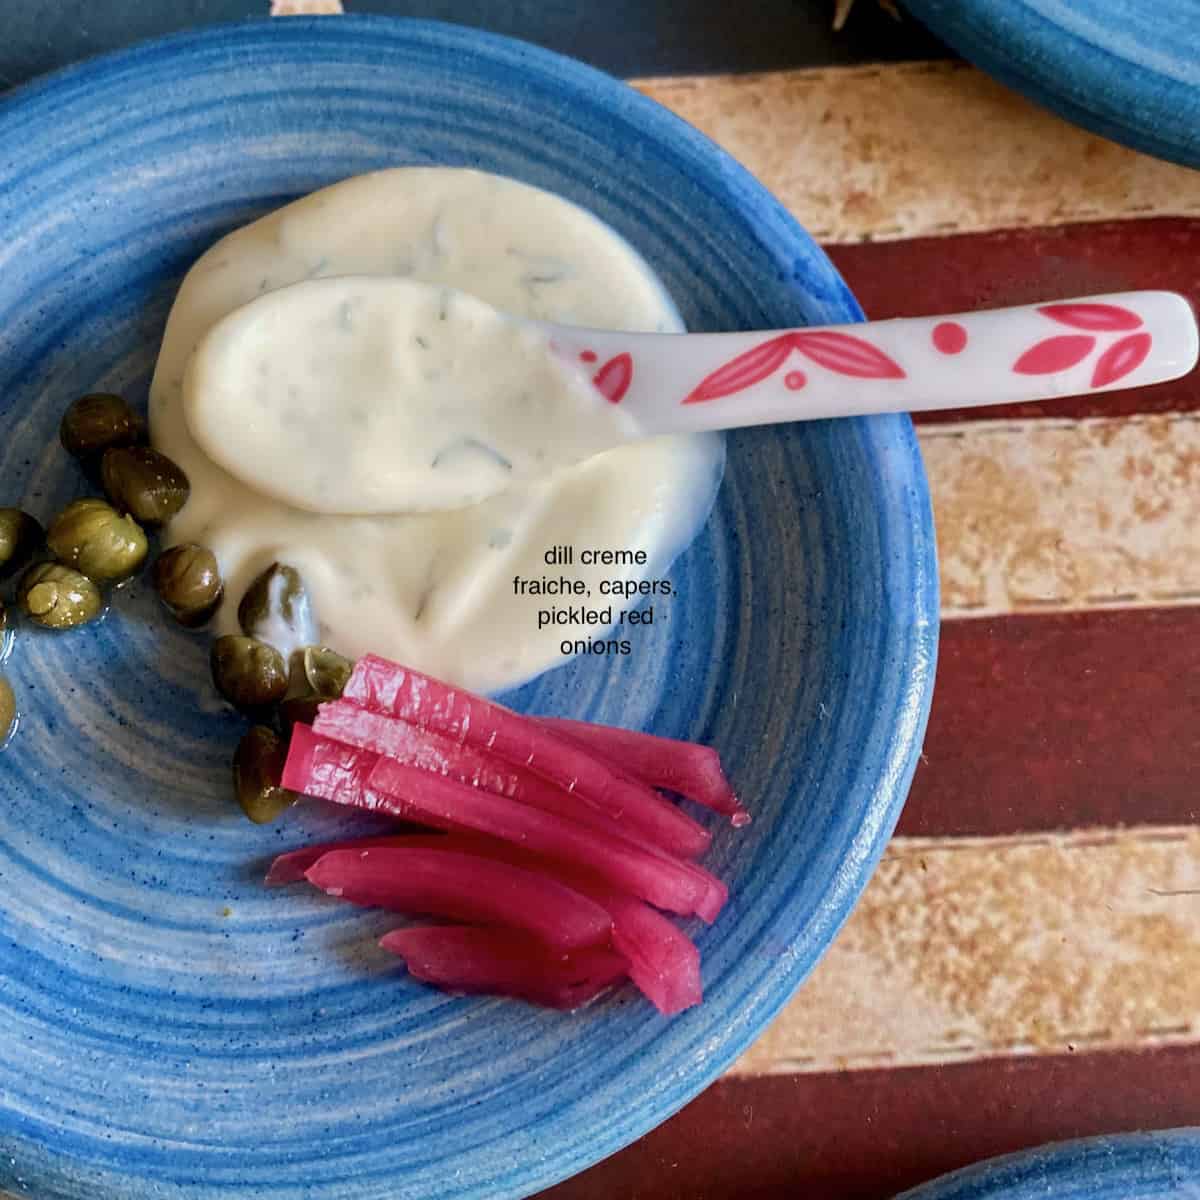 Capers, pickled red onions and creme fraiche on a blue plate with a spoon.